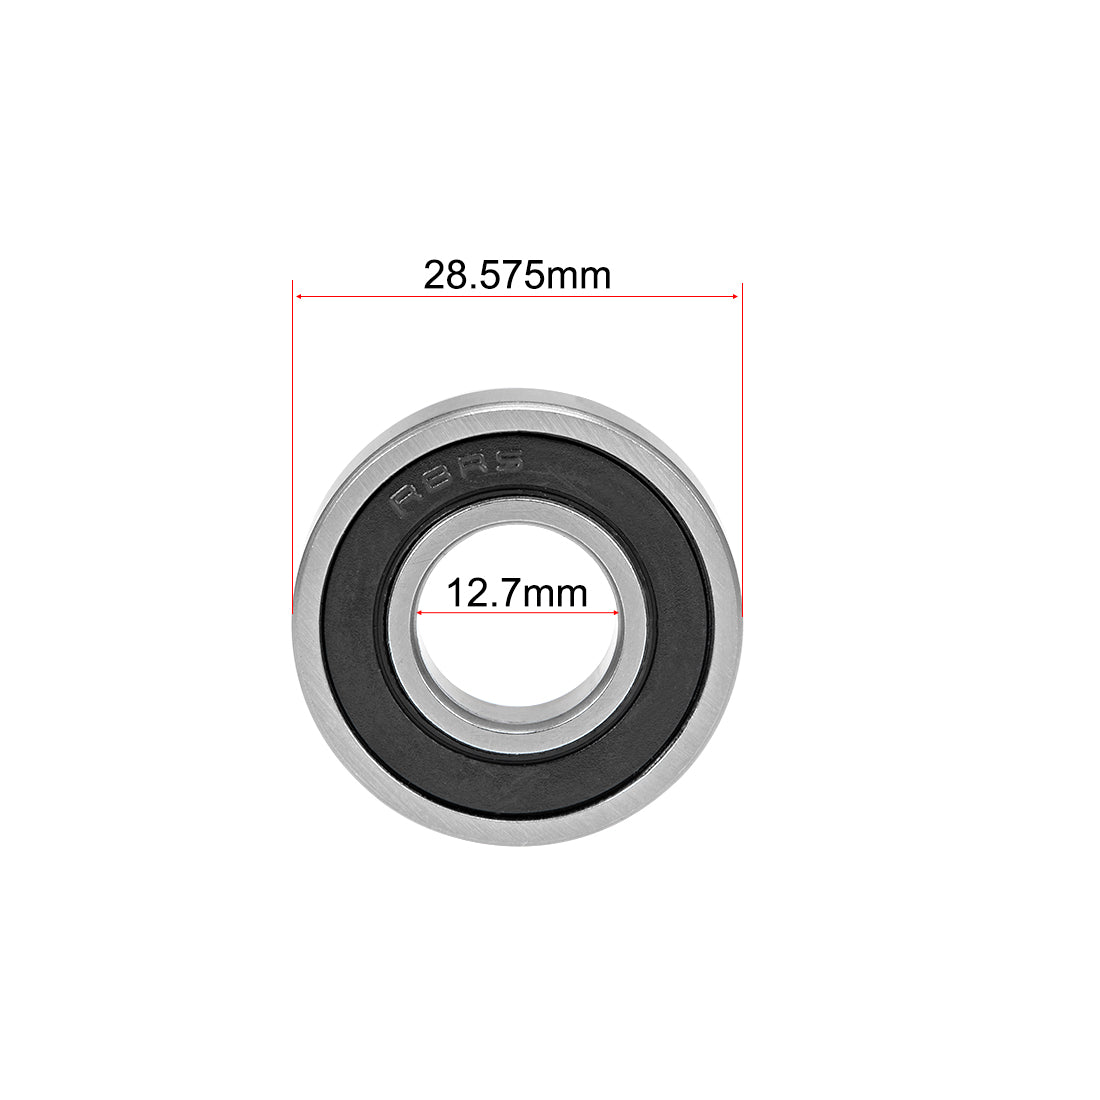 uxcell Uxcell Deep Groove Ball Bearing Double Sealed ABEC-3 Bearings